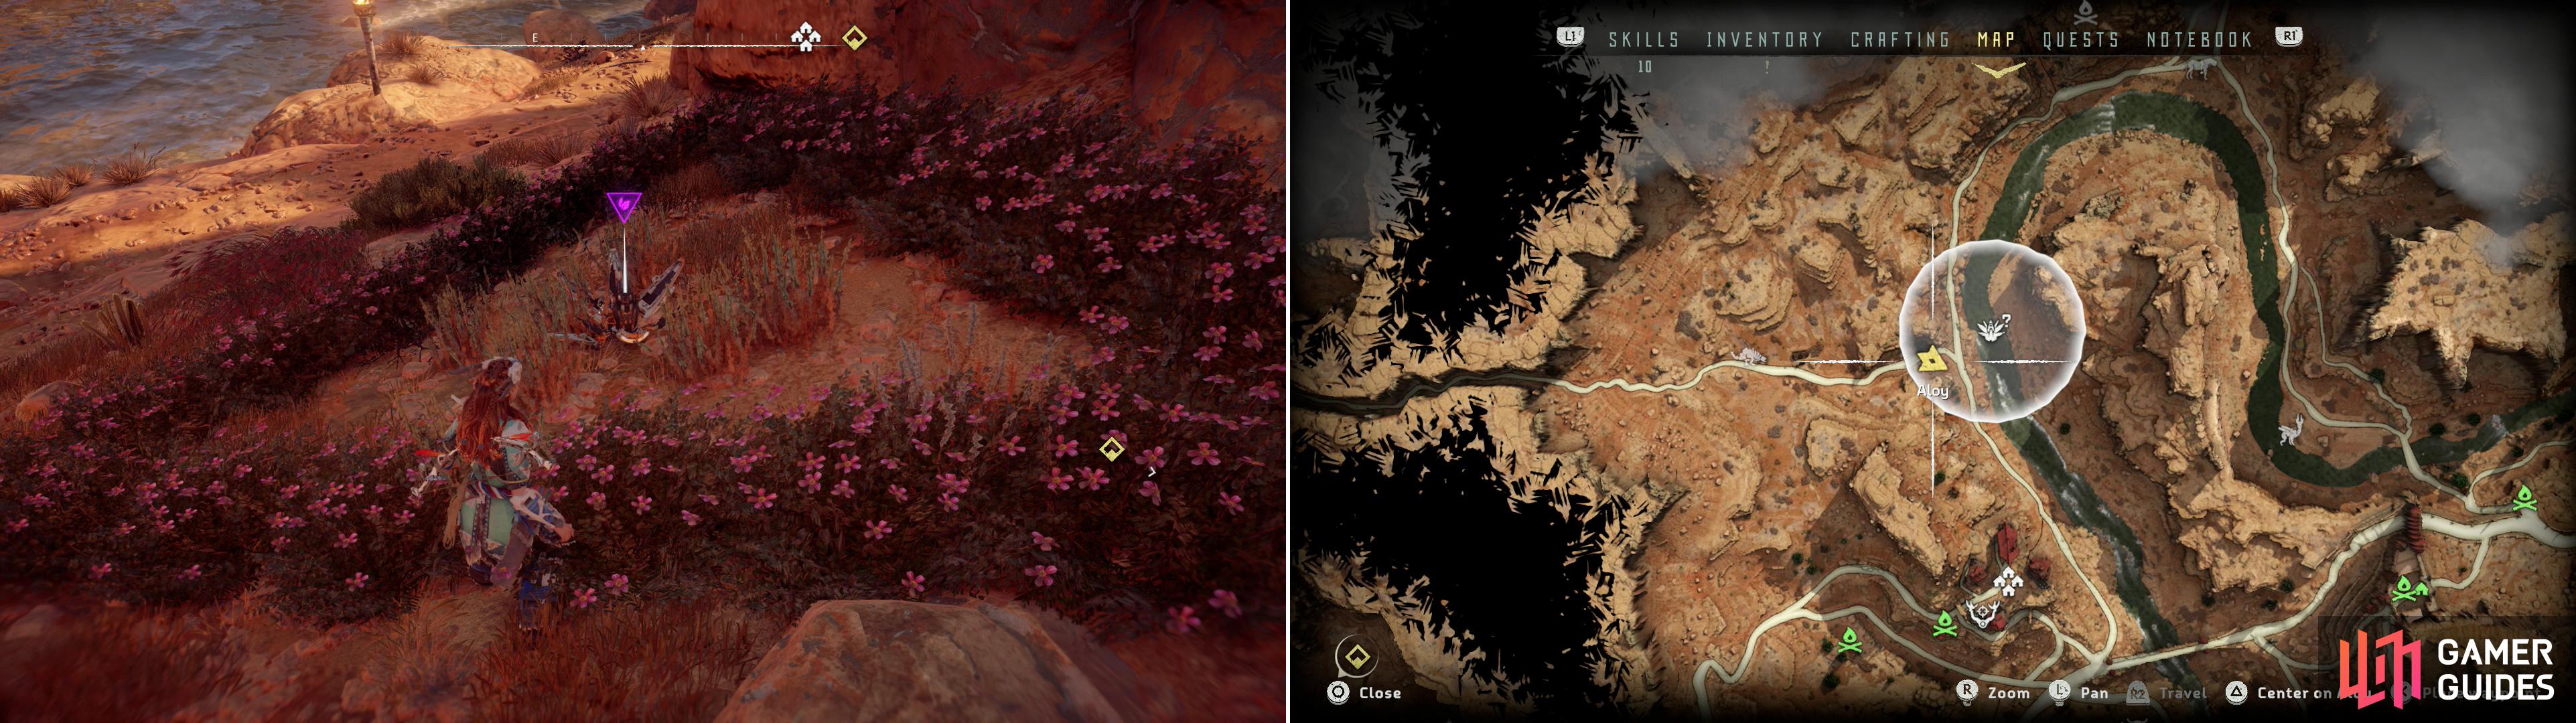 Find Metal Flower - Mark II (C) (left) at the location indicated on the map (right).